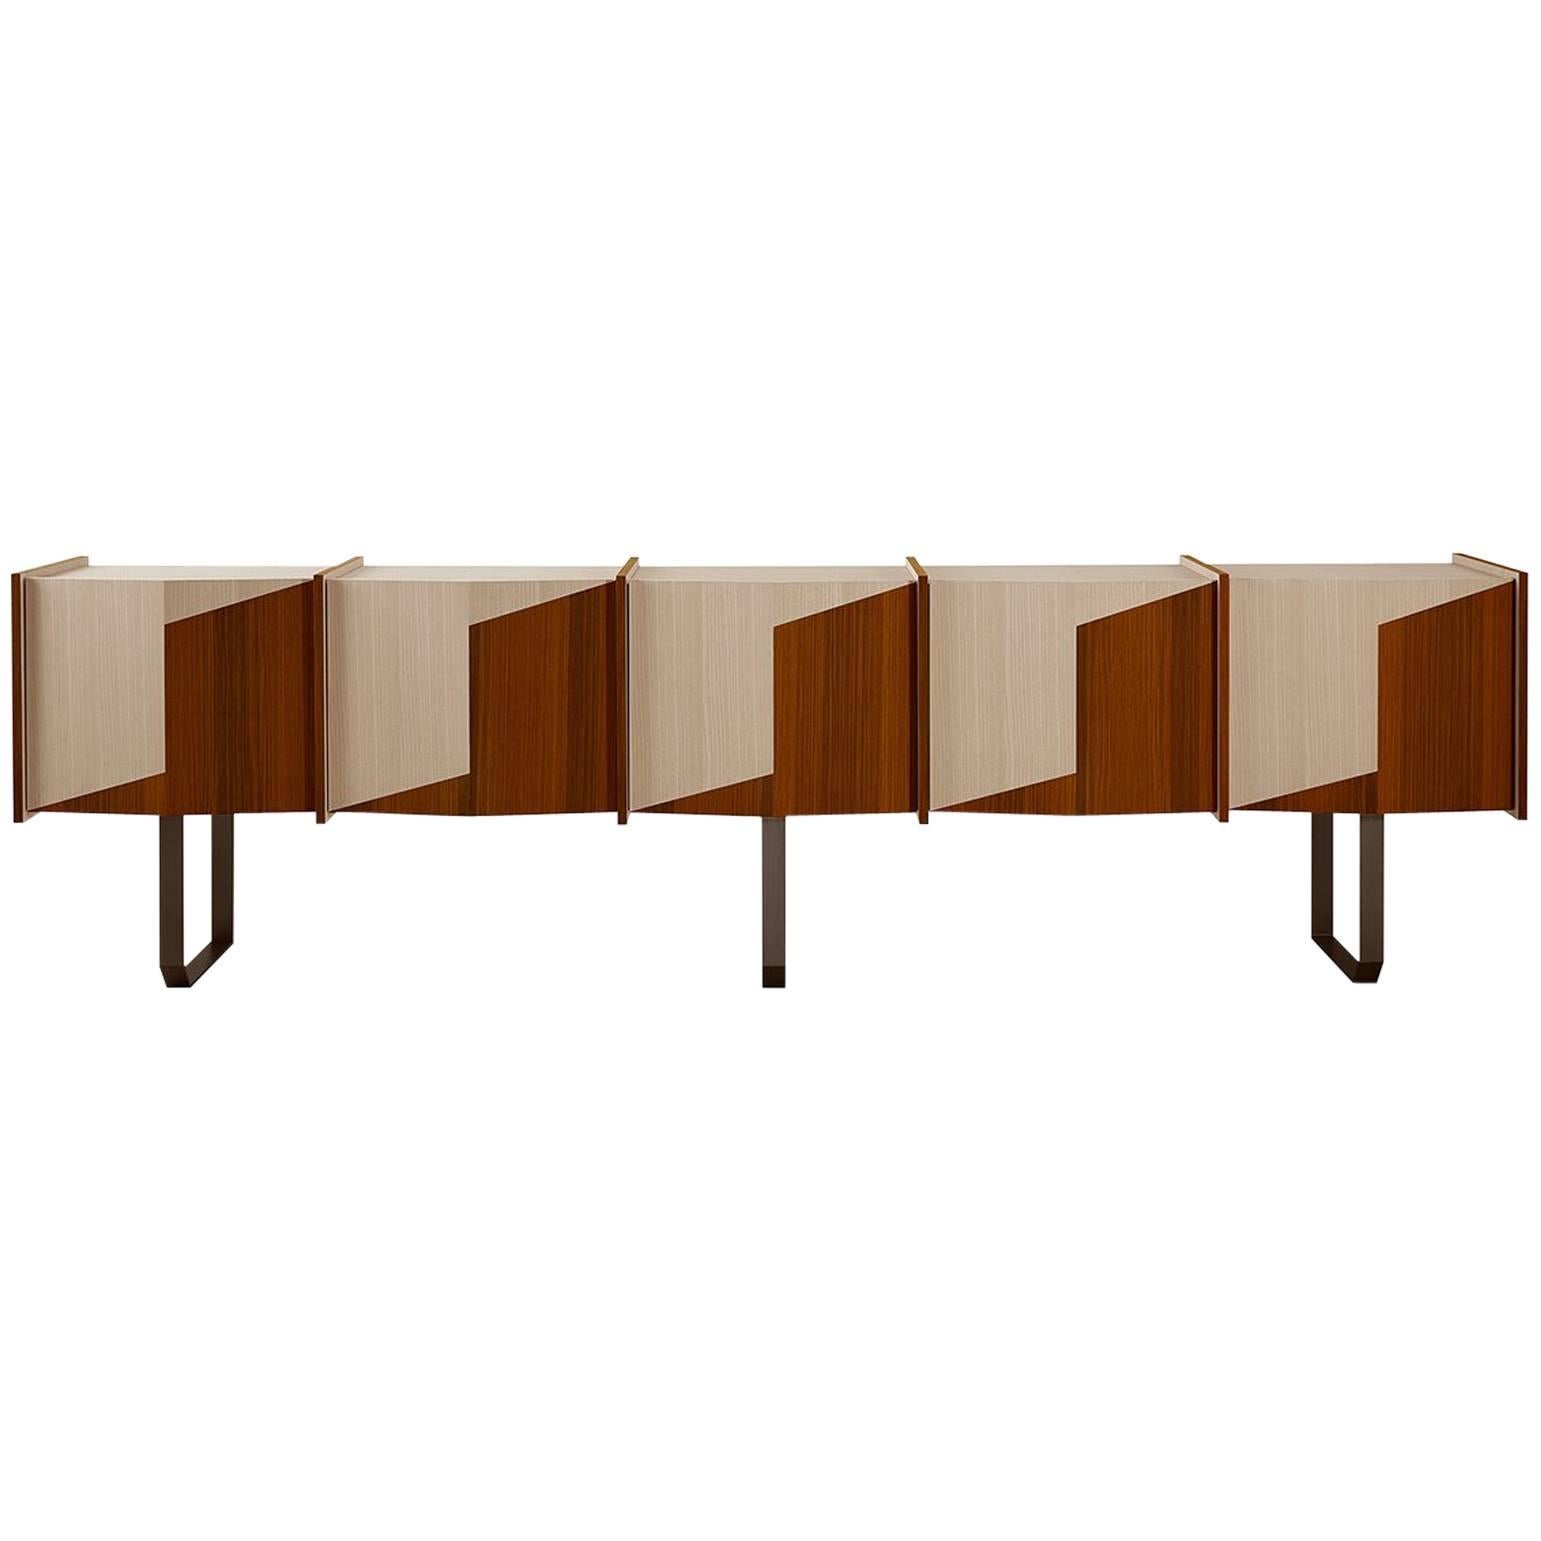 Diedro XL Sideboard / Credenza in Wood with Metal Details by Gallotti & Radice For Sale